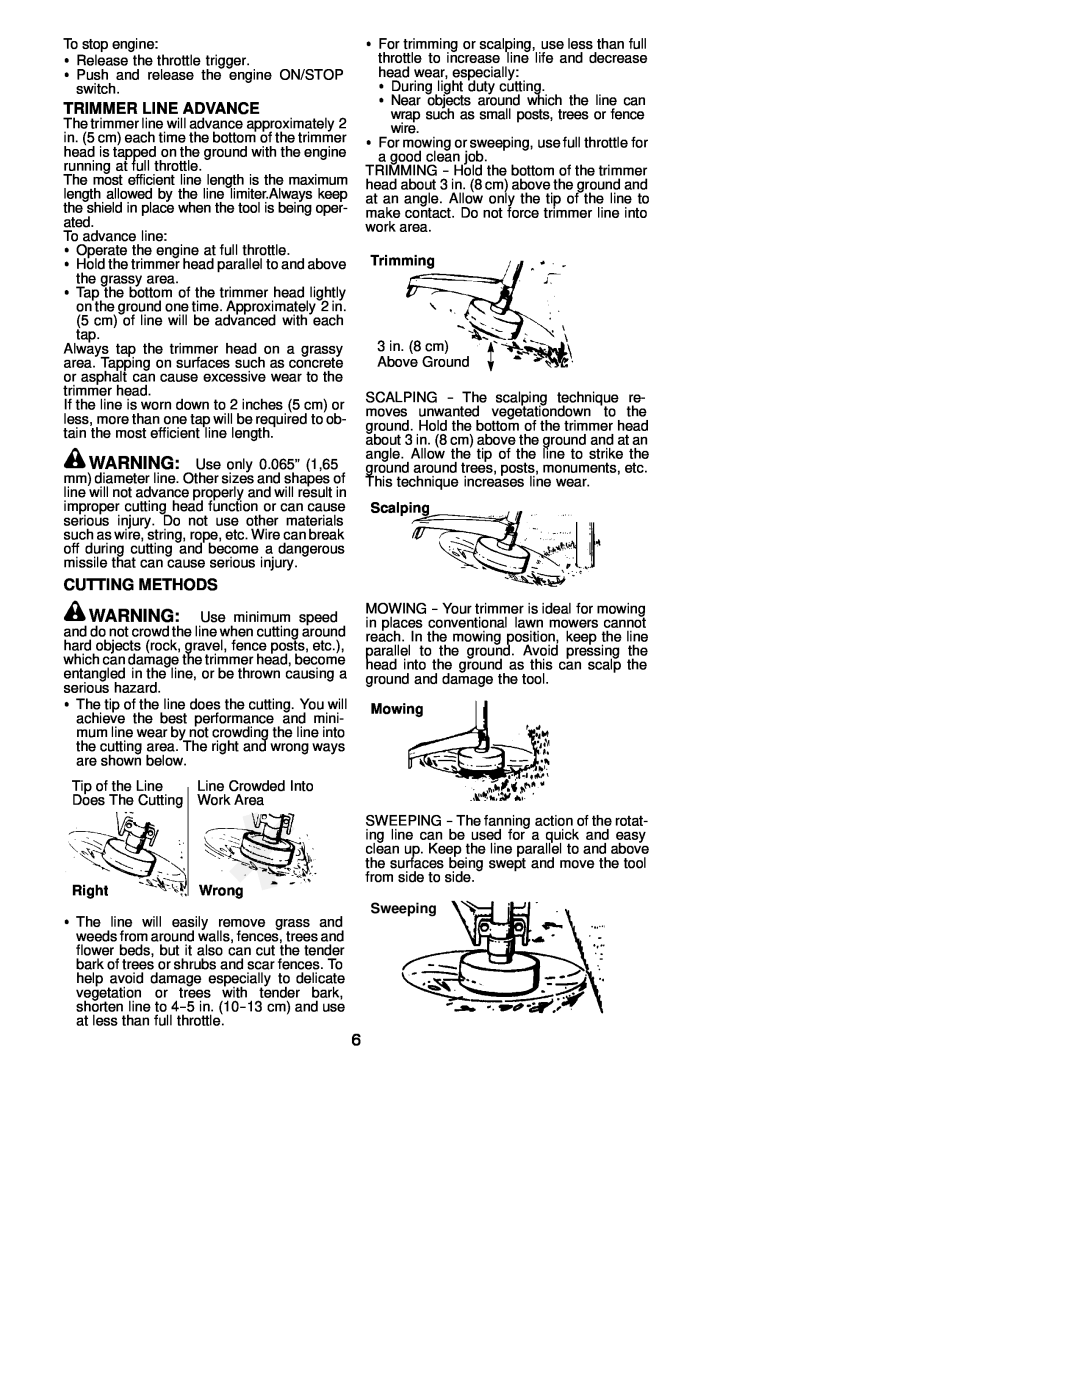 Electrolux WEEDEATER instruction manual Trimmer Line Advance, Cutting Methods, Trimming, Scalping, Right, Mowing, Sweeping 